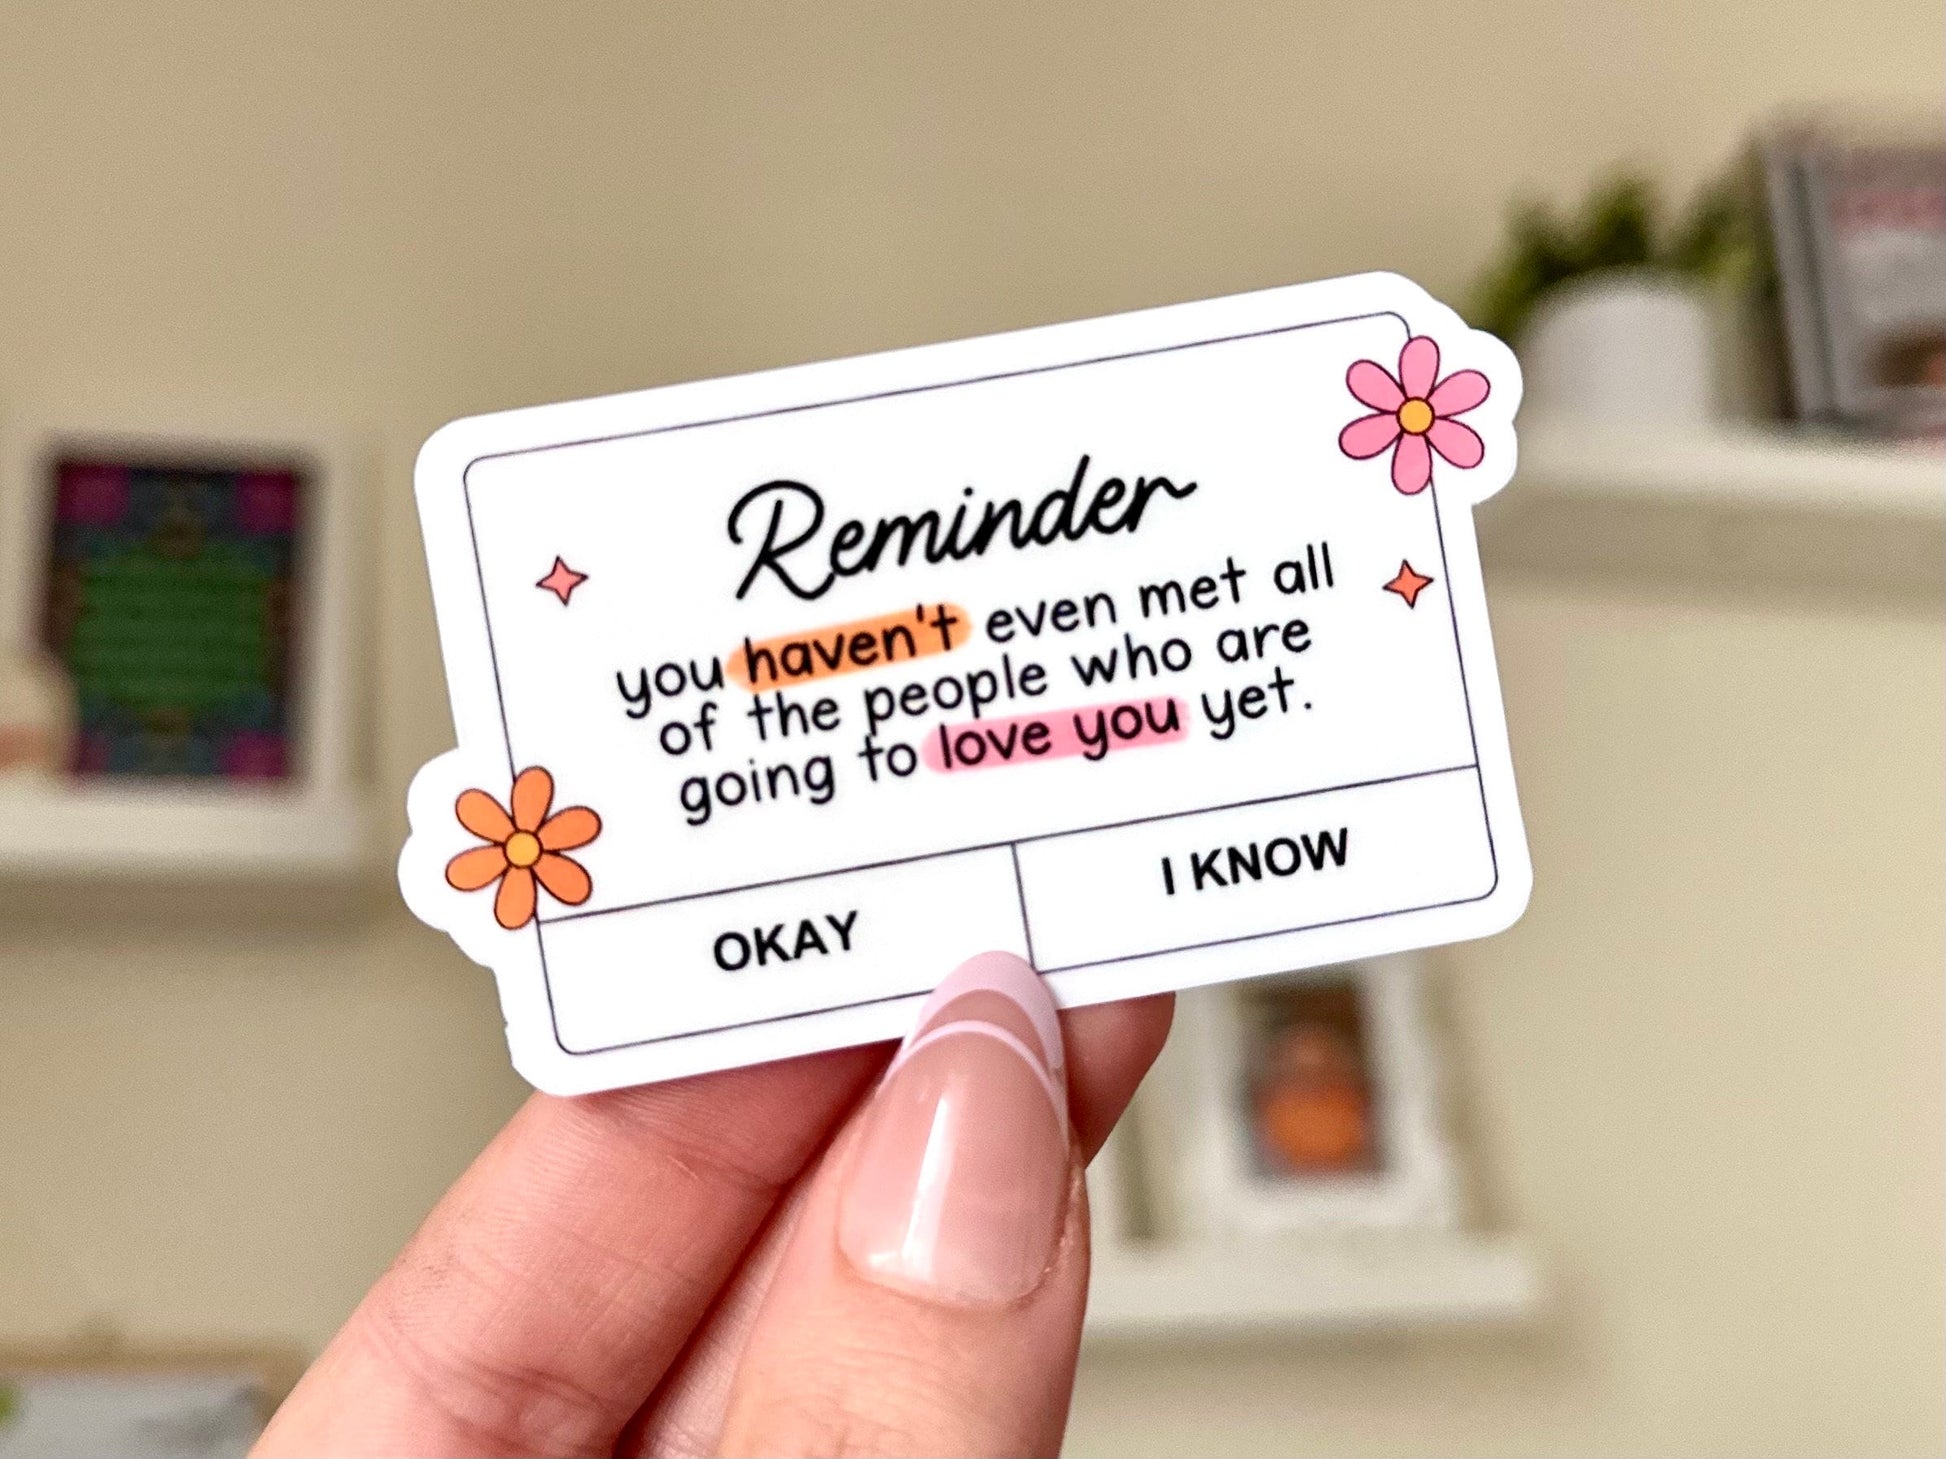 Reminder: You Haven’t Met All Of The People Who Are Going To Love You Yet Waterproof Sticker, Groovy Sticker, Self Care, Self Love Sticker